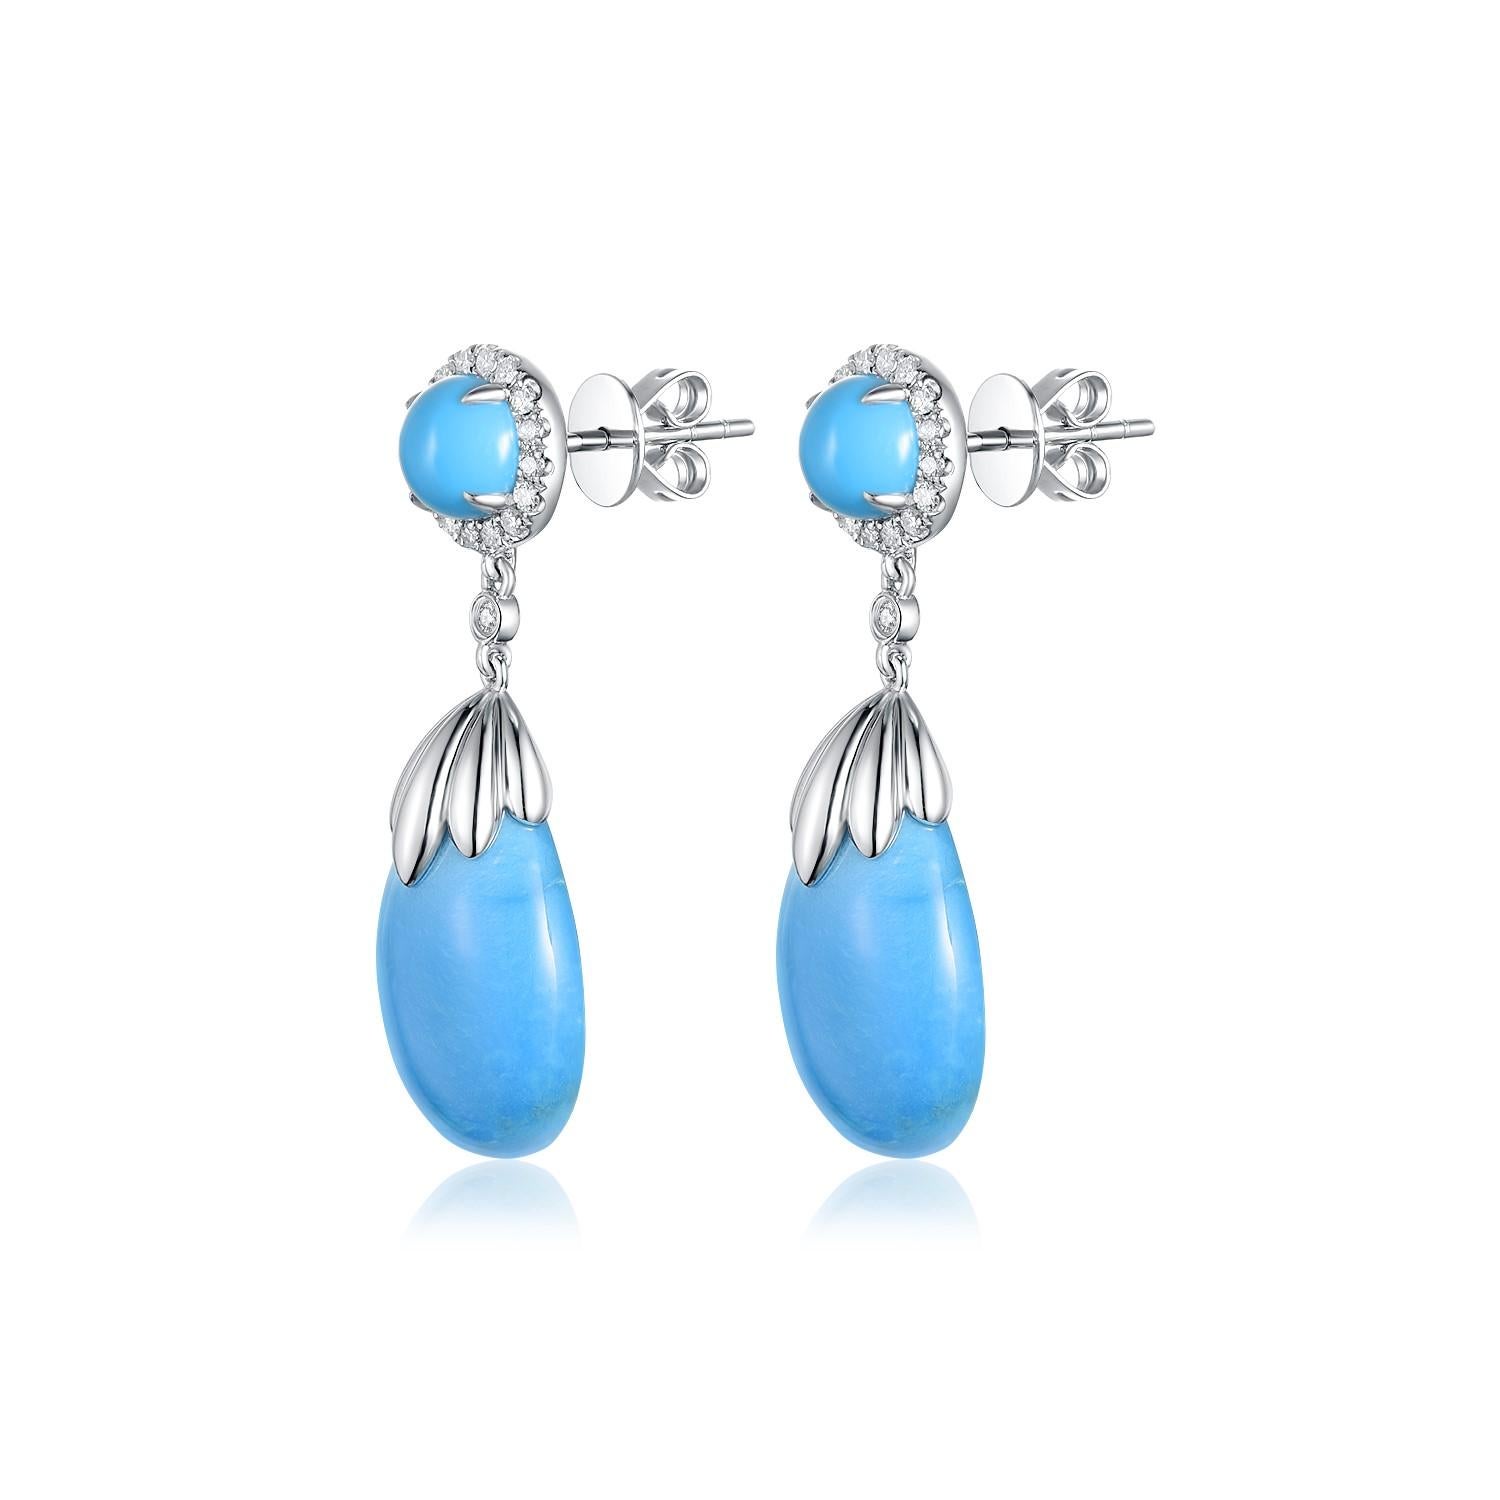 These captivating earrings exude an air of sophistication and artistic flair, beautifully crafted from 14K white gold. Each earring features a serene turquoise gemstone, weighing a total of 3.98 grams, cut into a smooth teardrop shape that evokes